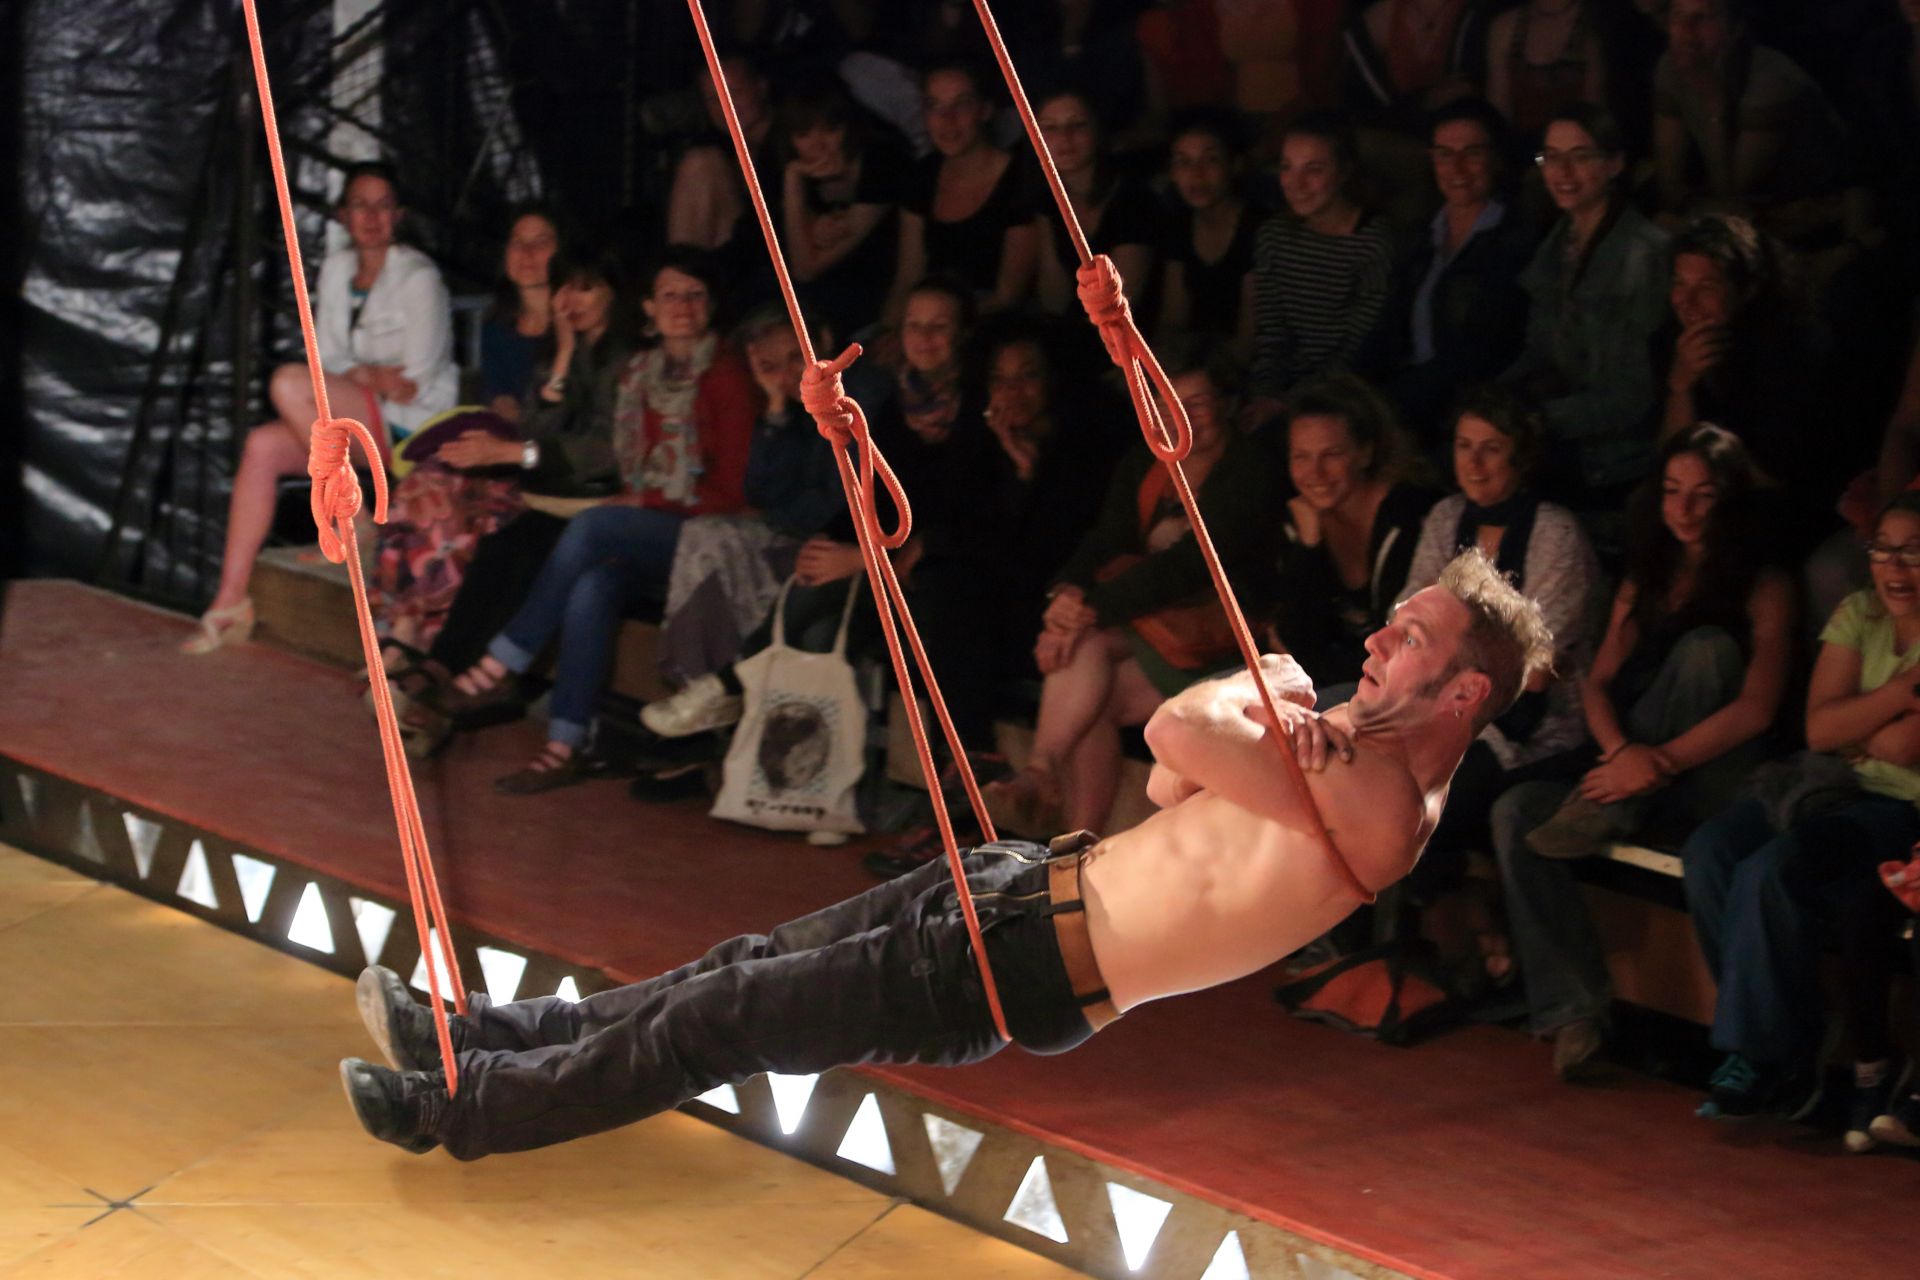 A circus show for adults: 